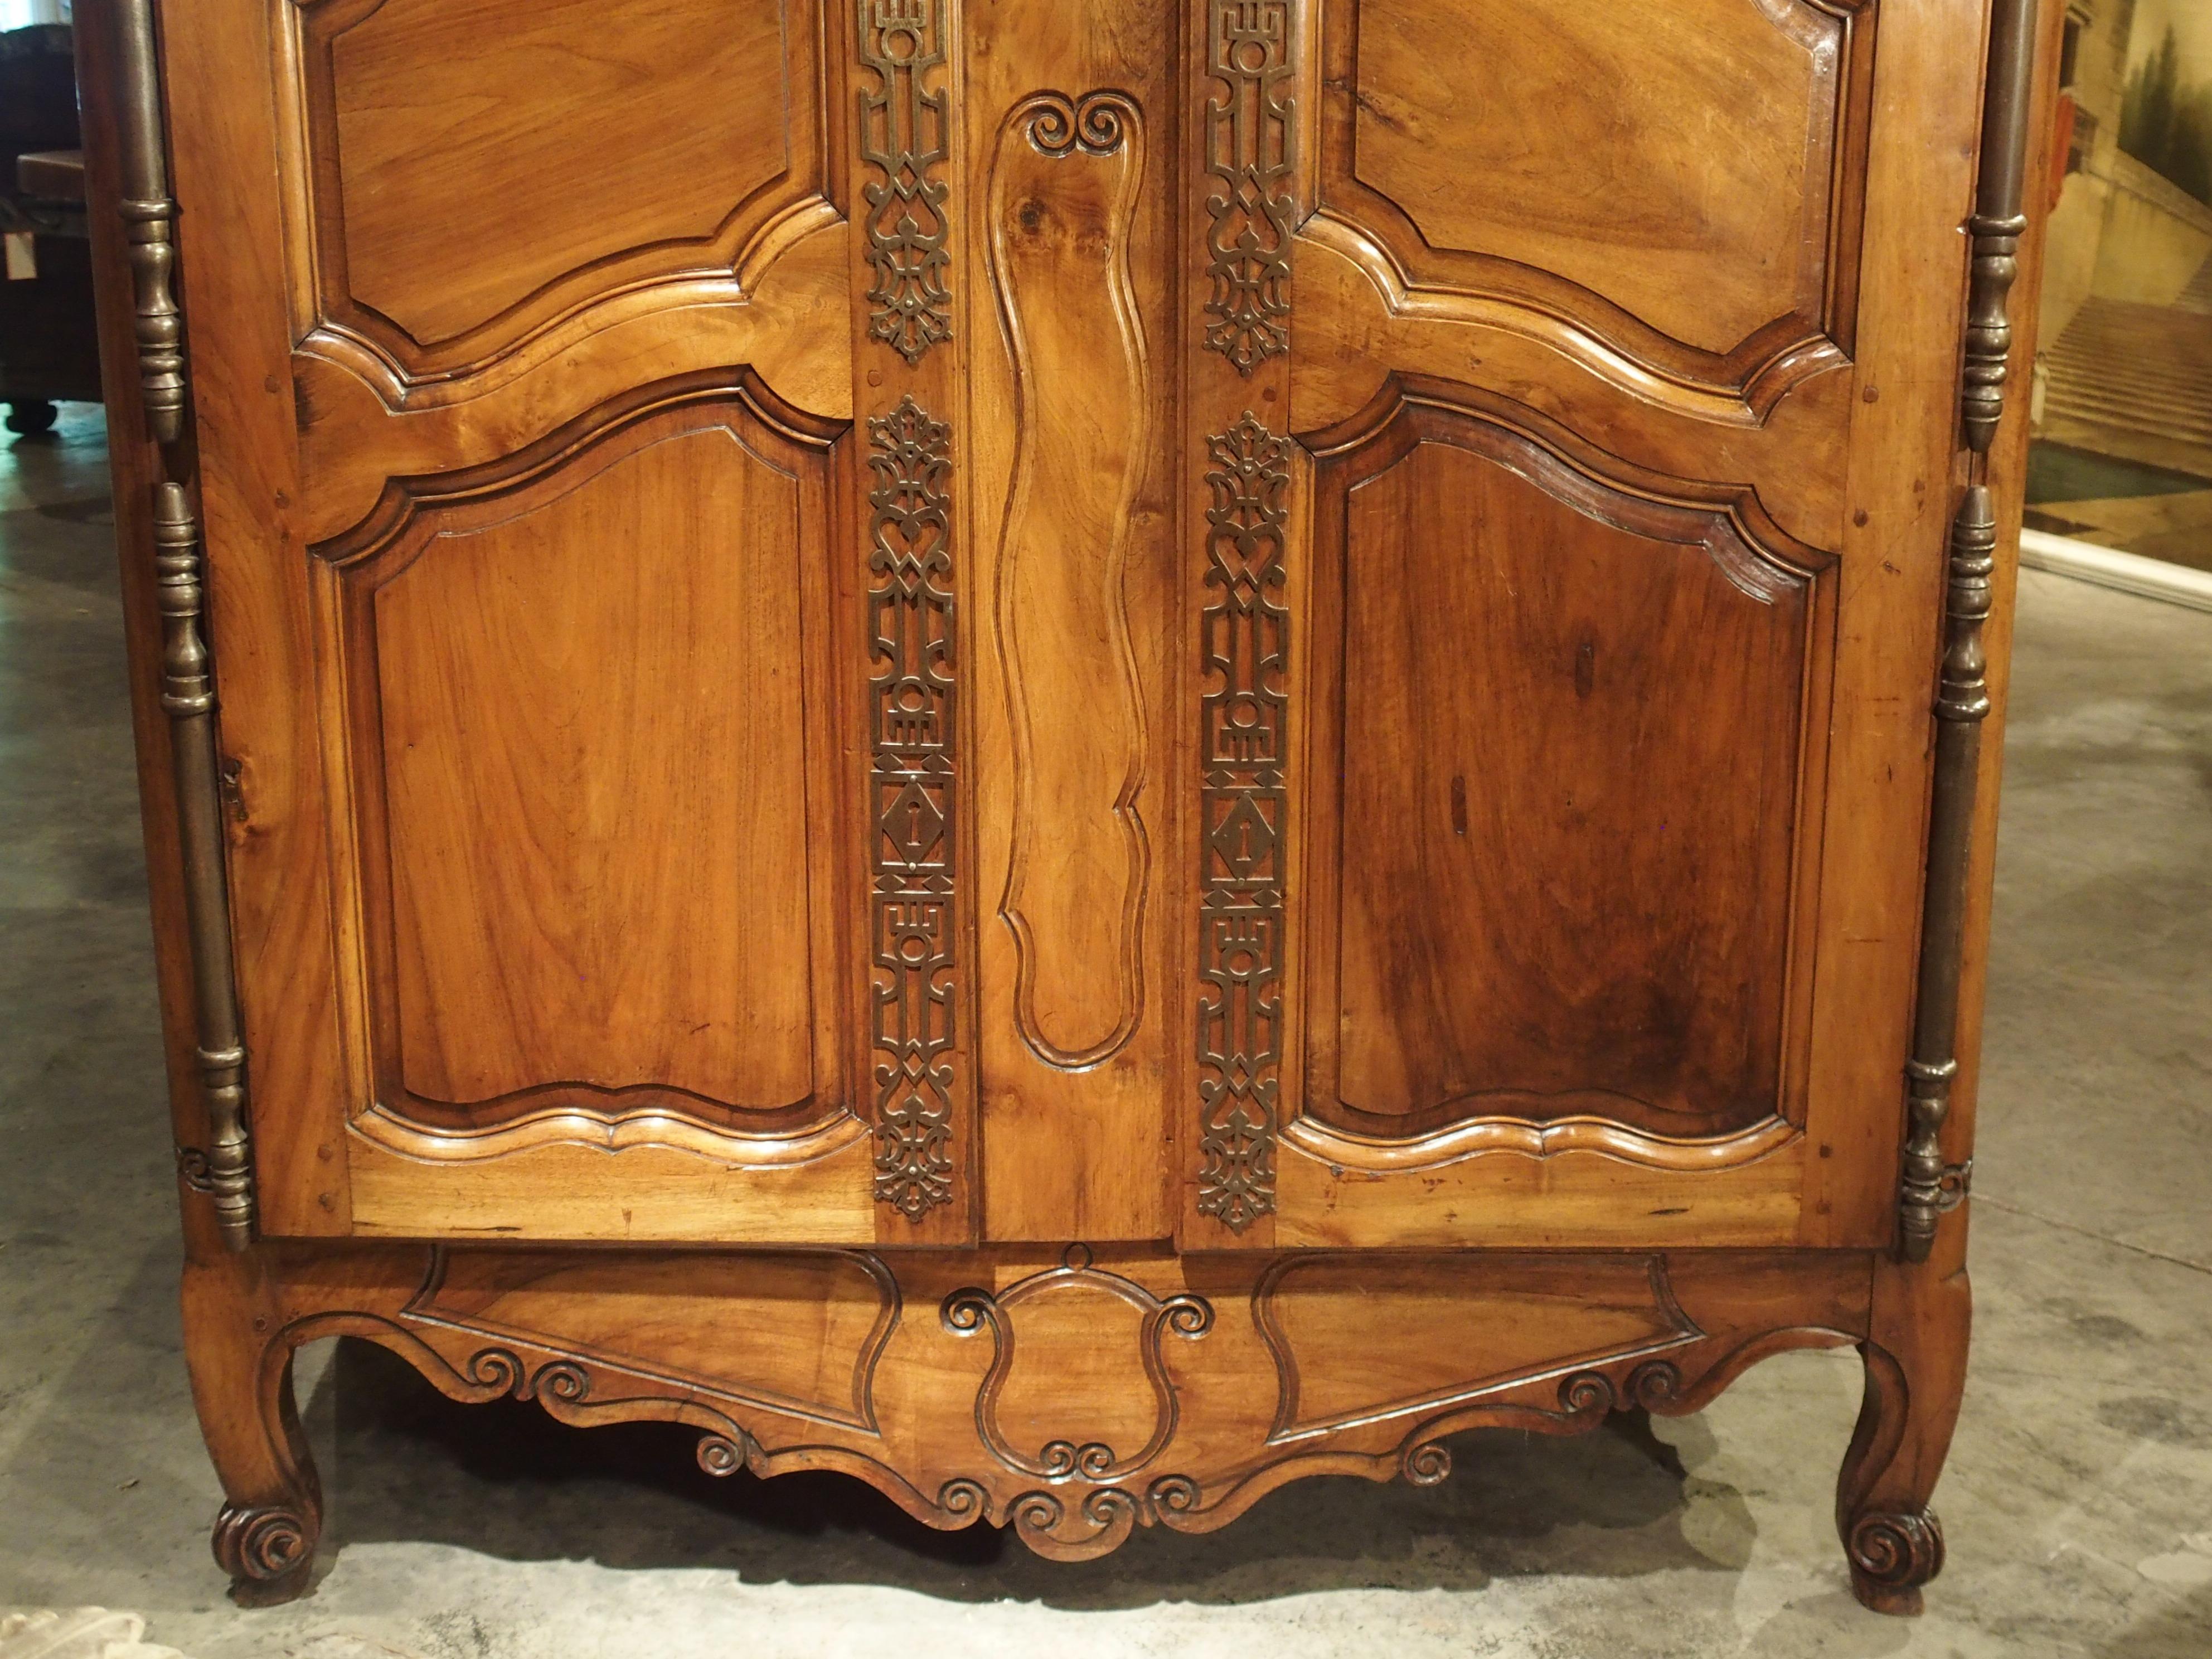 This elegant antique French armoire from Fourques, France is a masterpiece of balance in its design. It has very sparse yet deeply carved c-scroll motifs on all of the thick tri-partite walnut wood panels. This simplicity is balanced by ornate